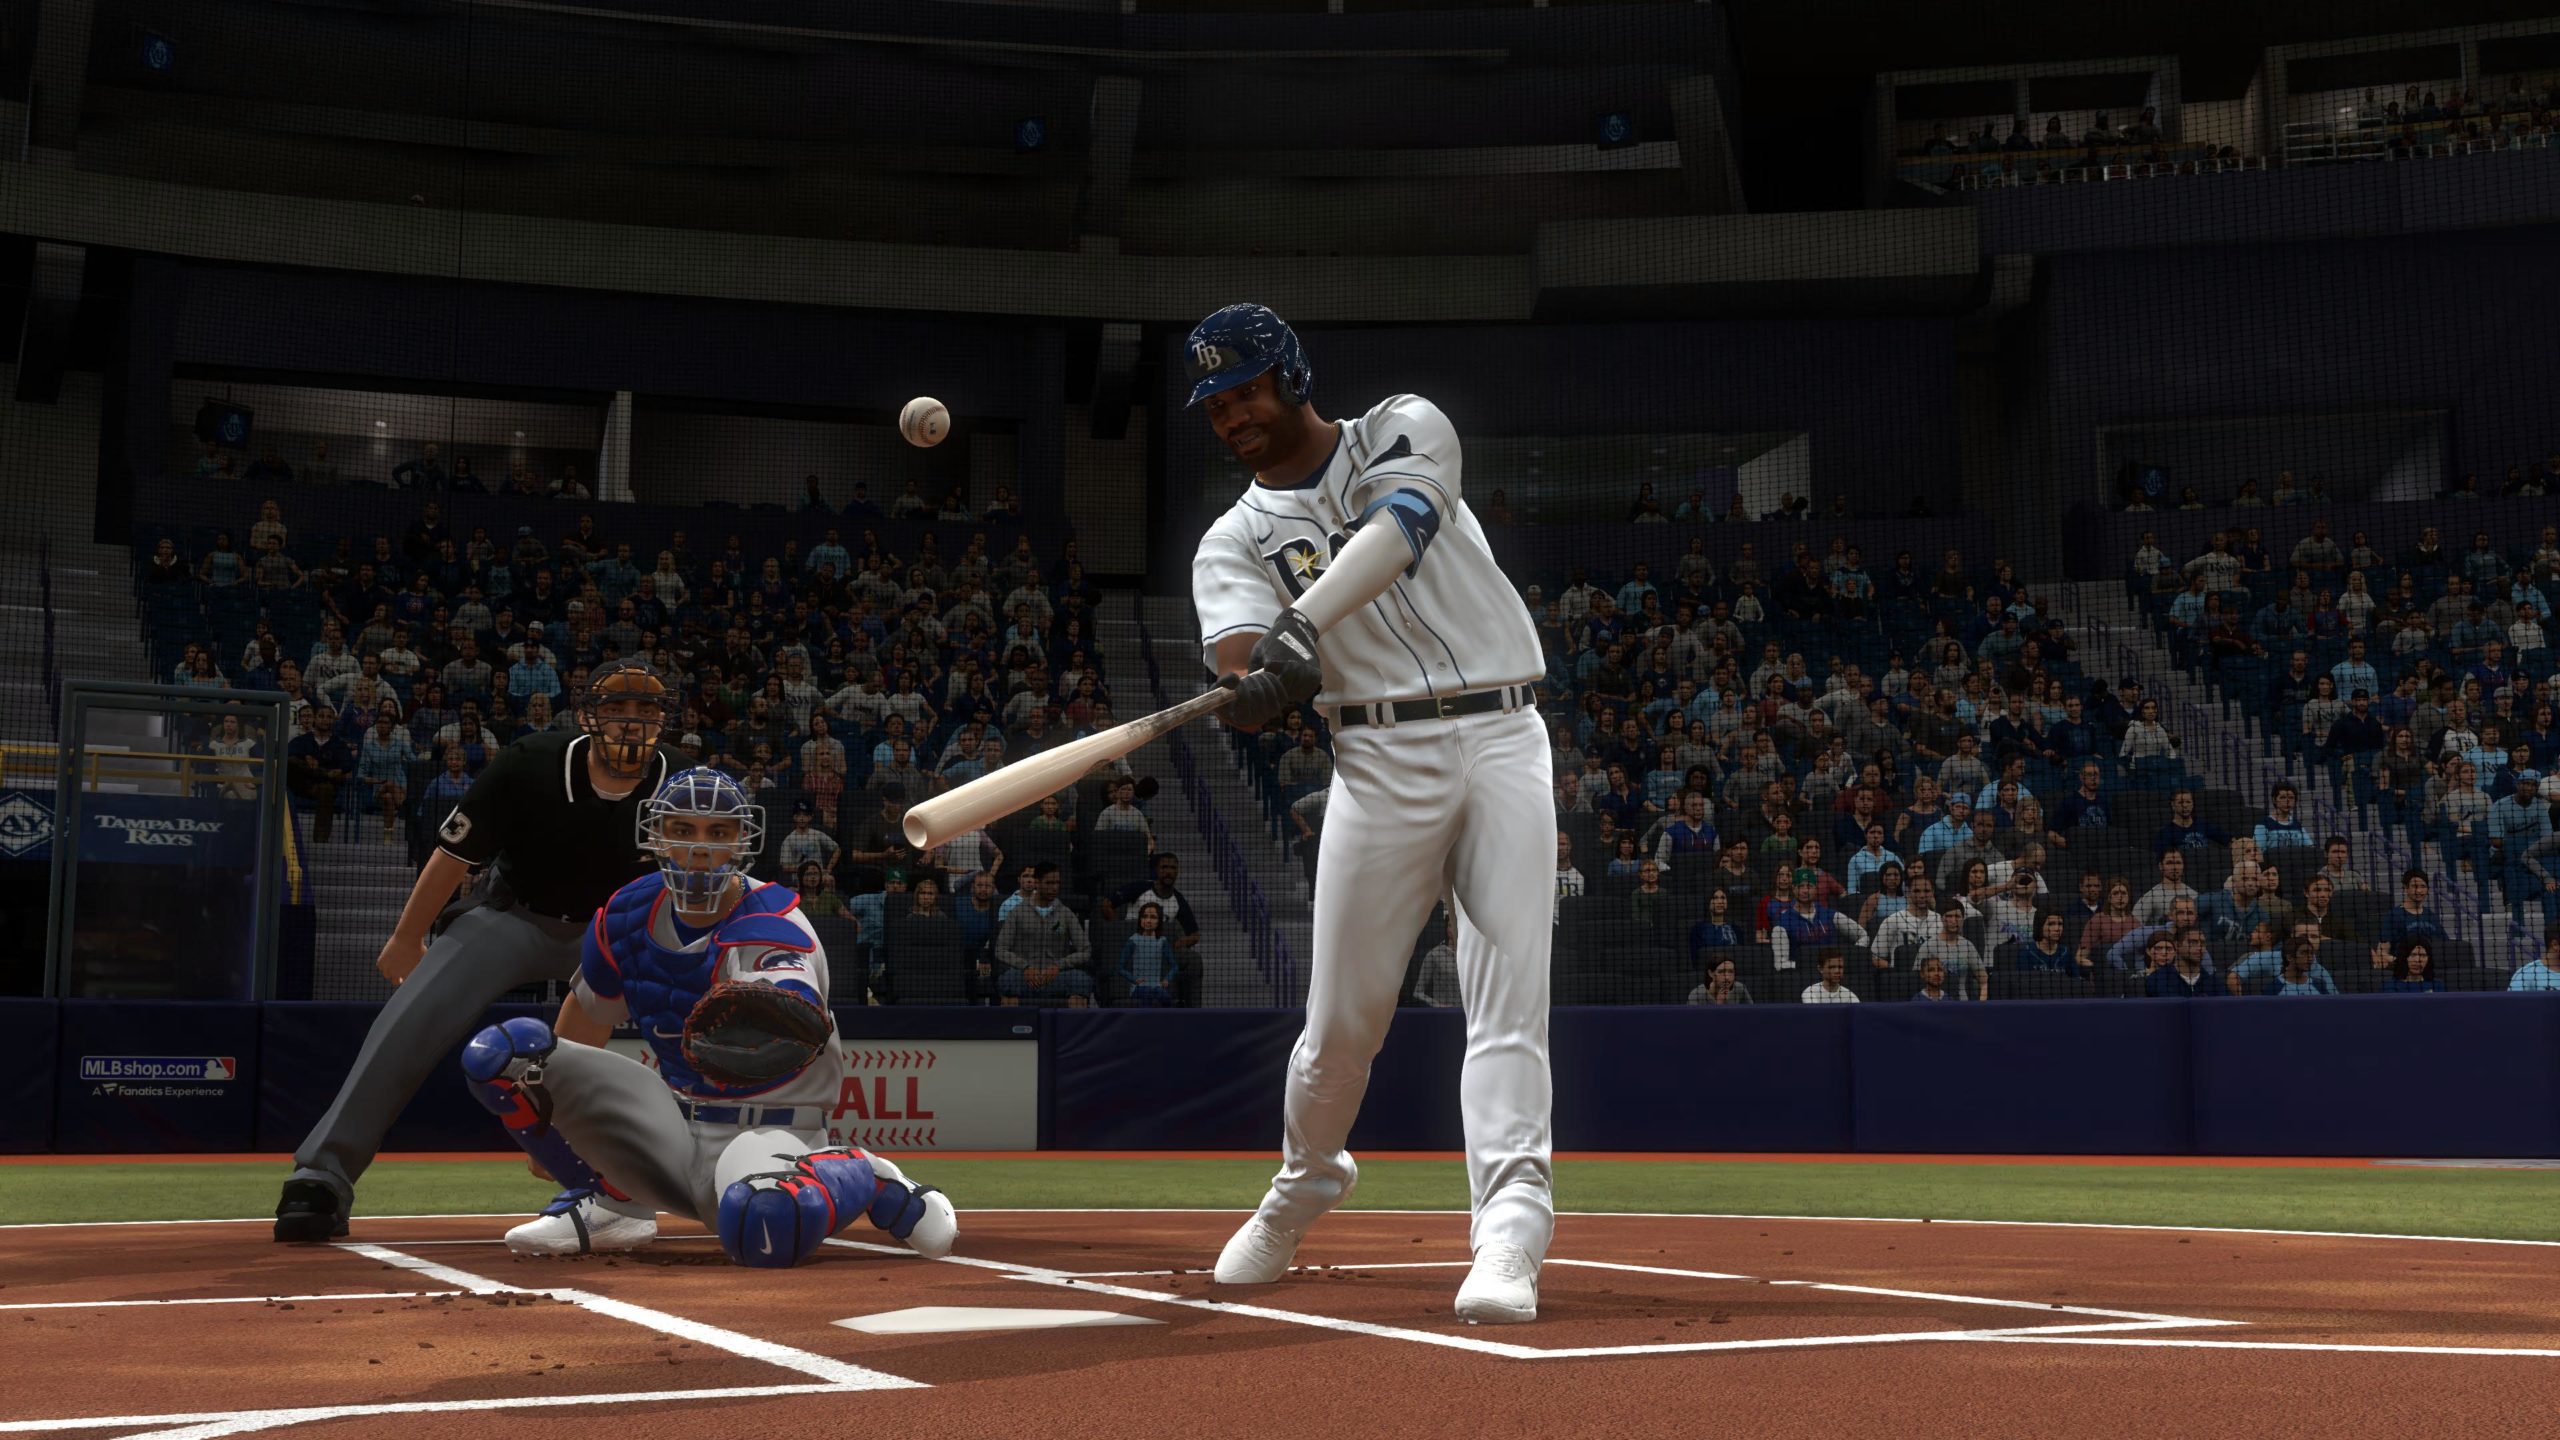 The Best Teams For Franchise Mode In MLB The Show 21